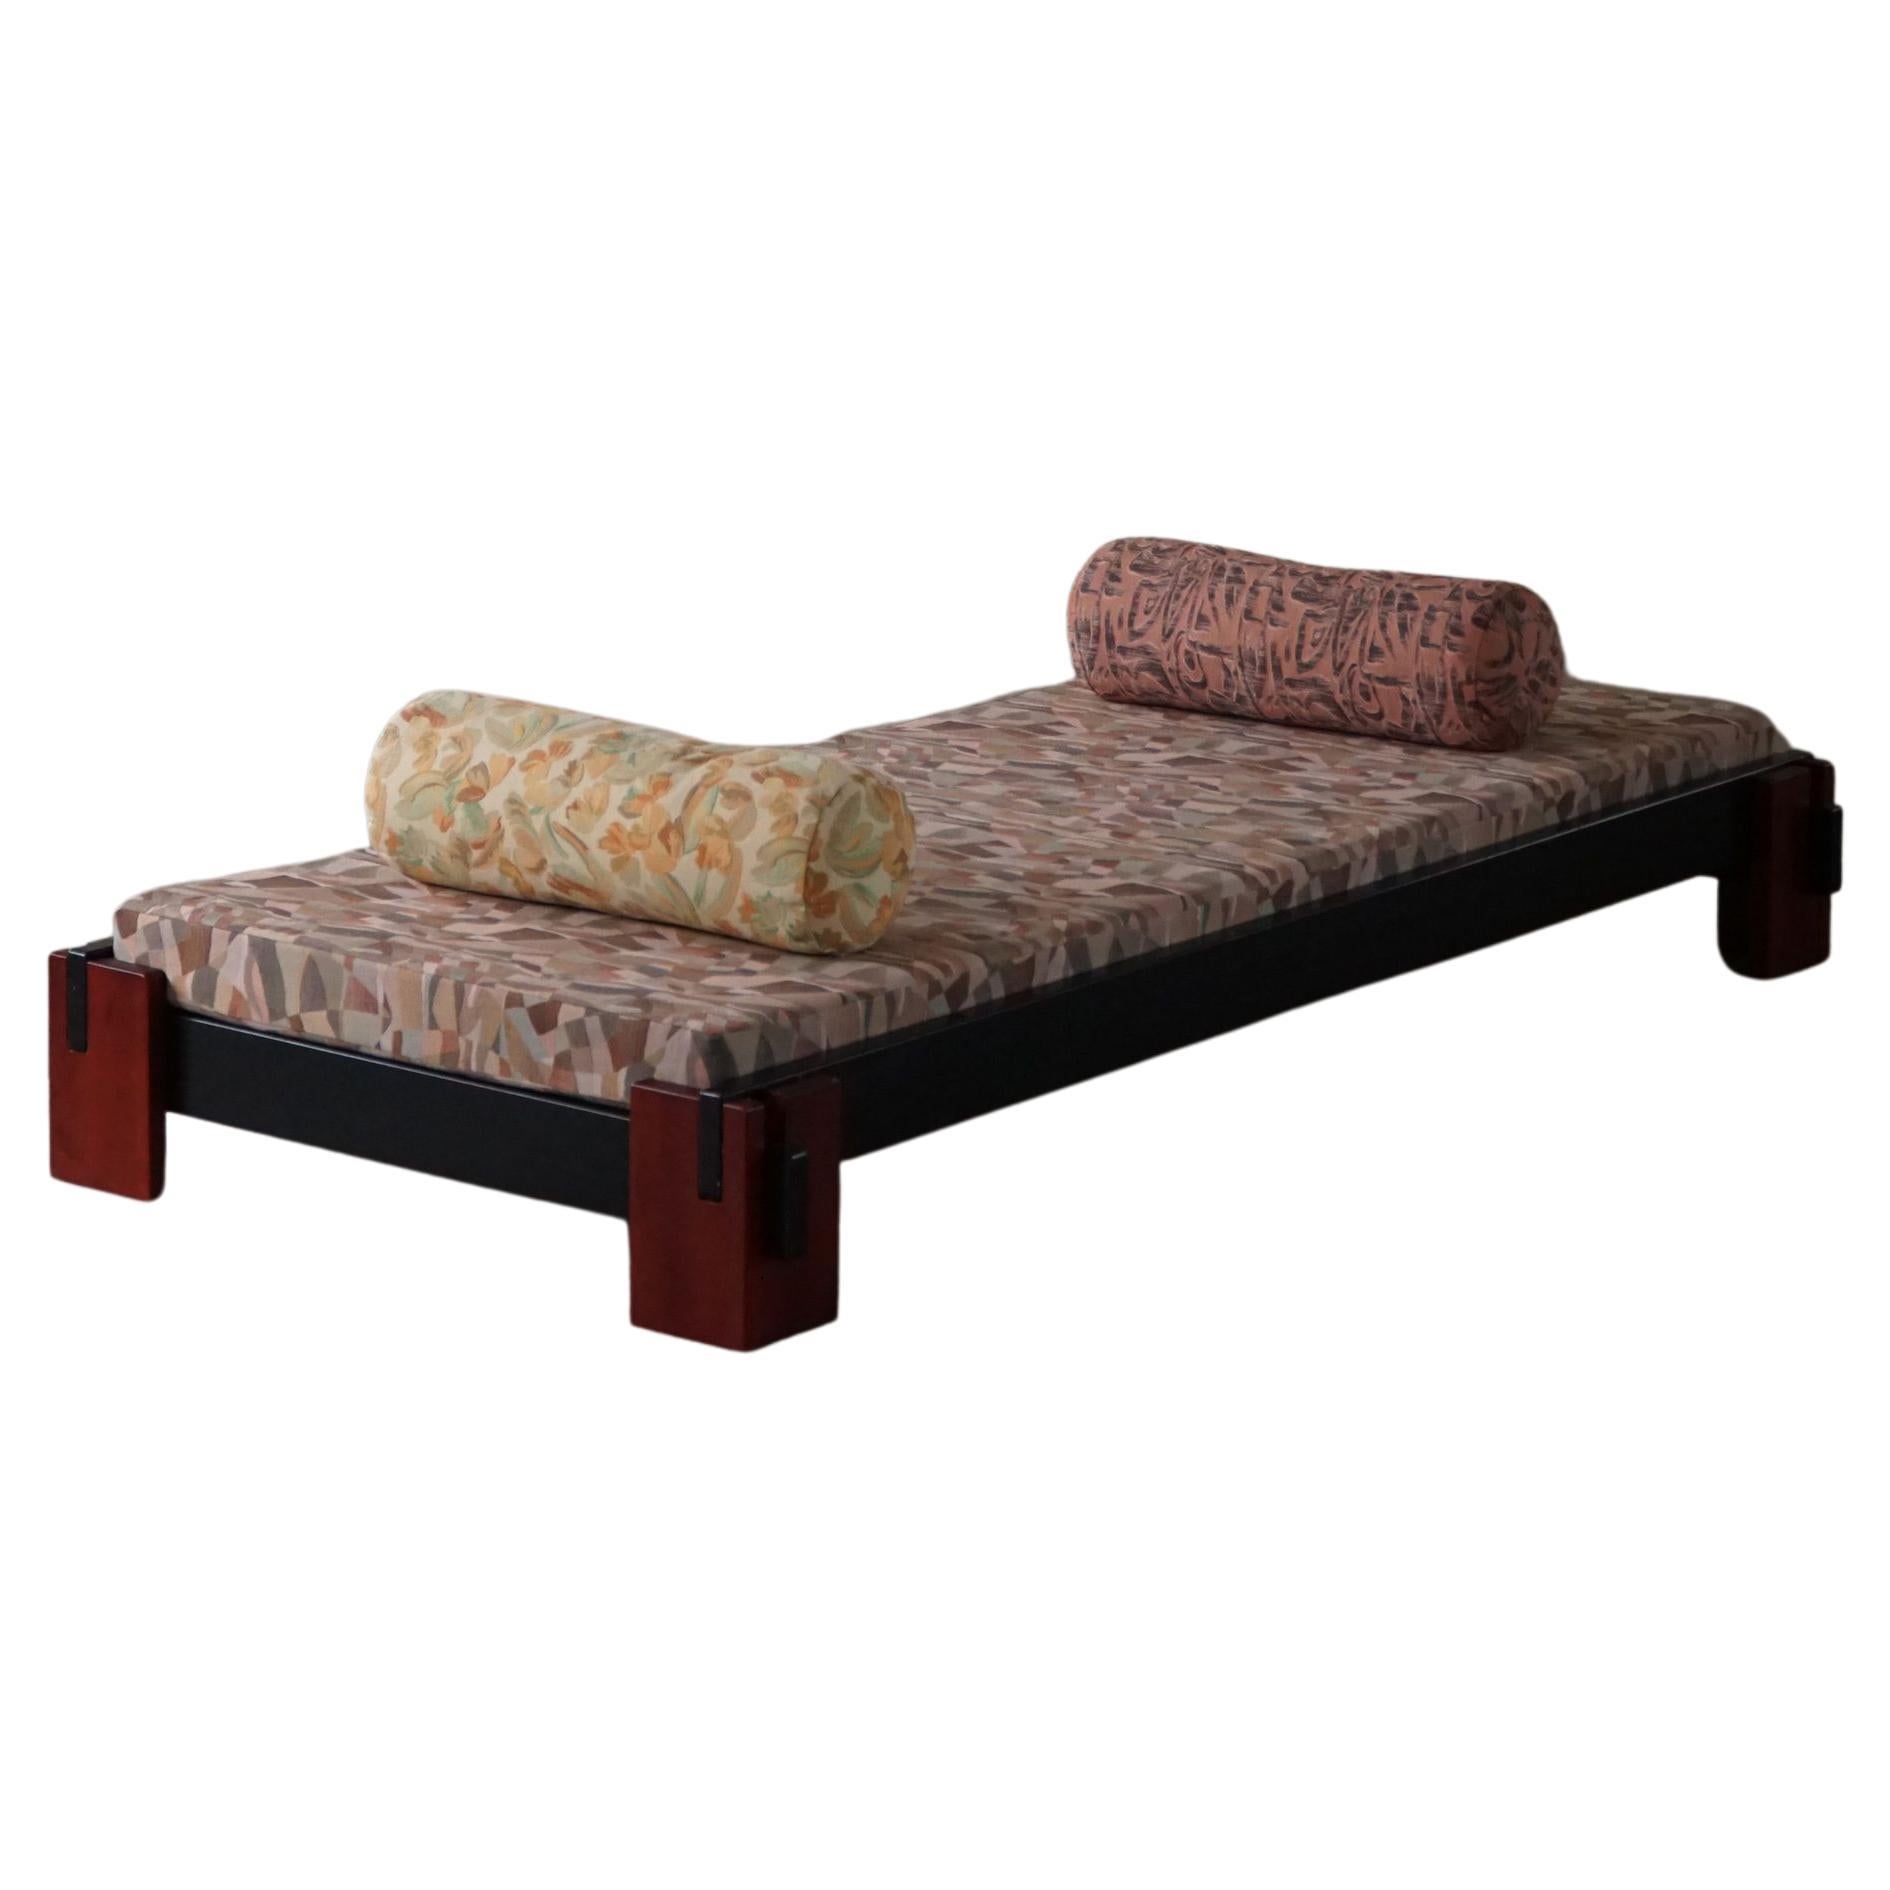 Danish Modern, Minimalist Daybed Reupholstered in Vintage Fabric, Made in 1980s